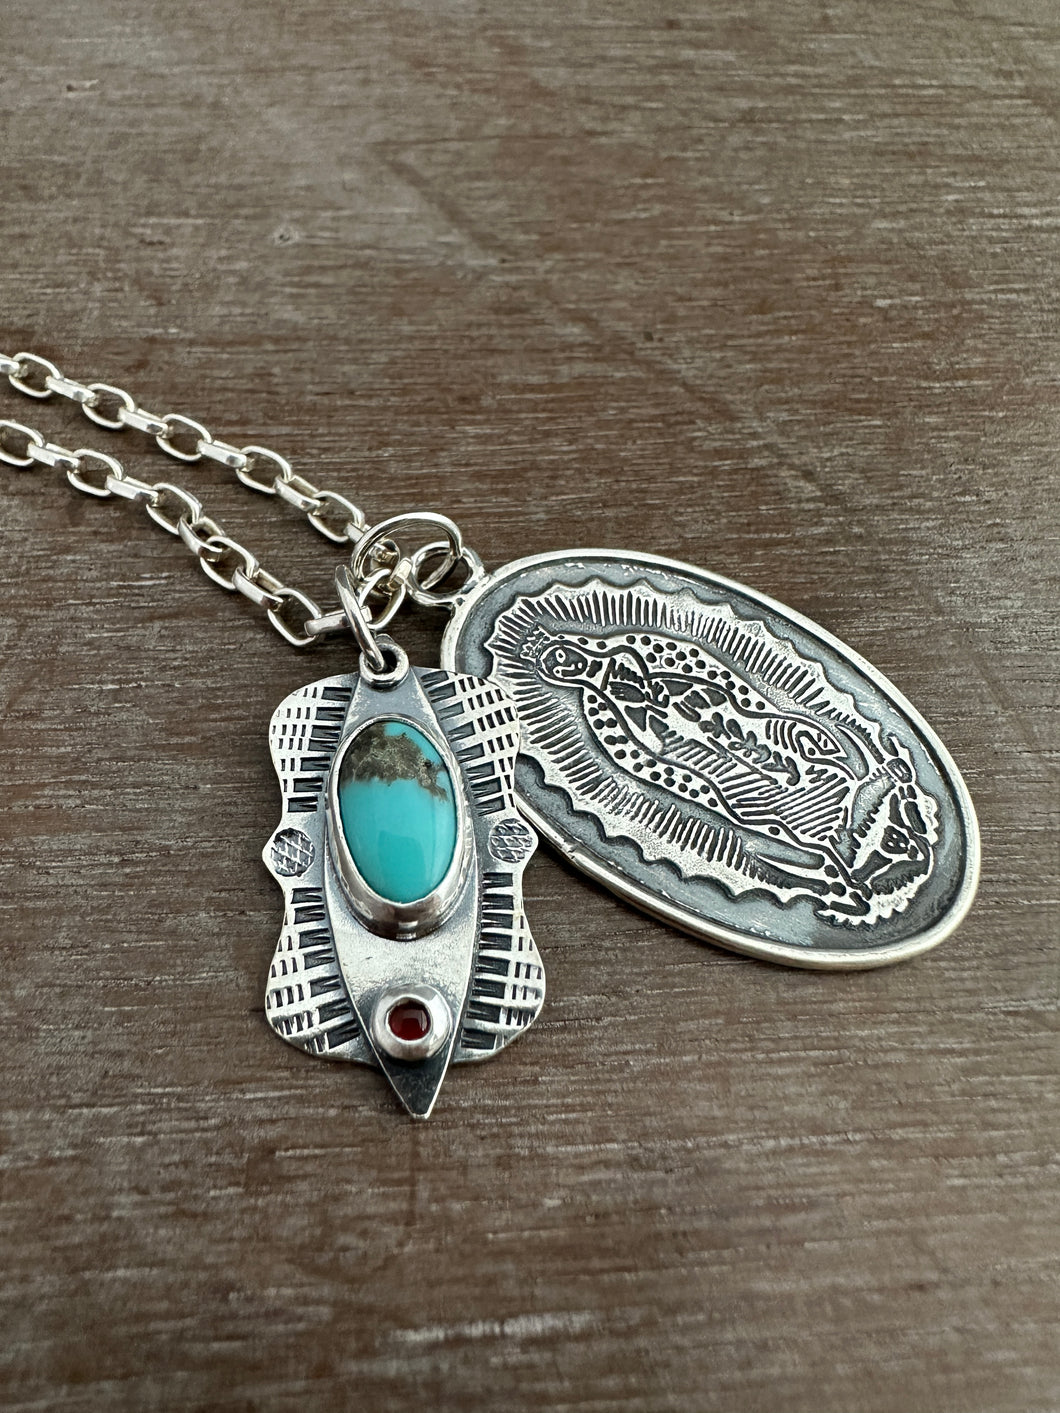 Our Lady of Guadalupe and turquoise charm set